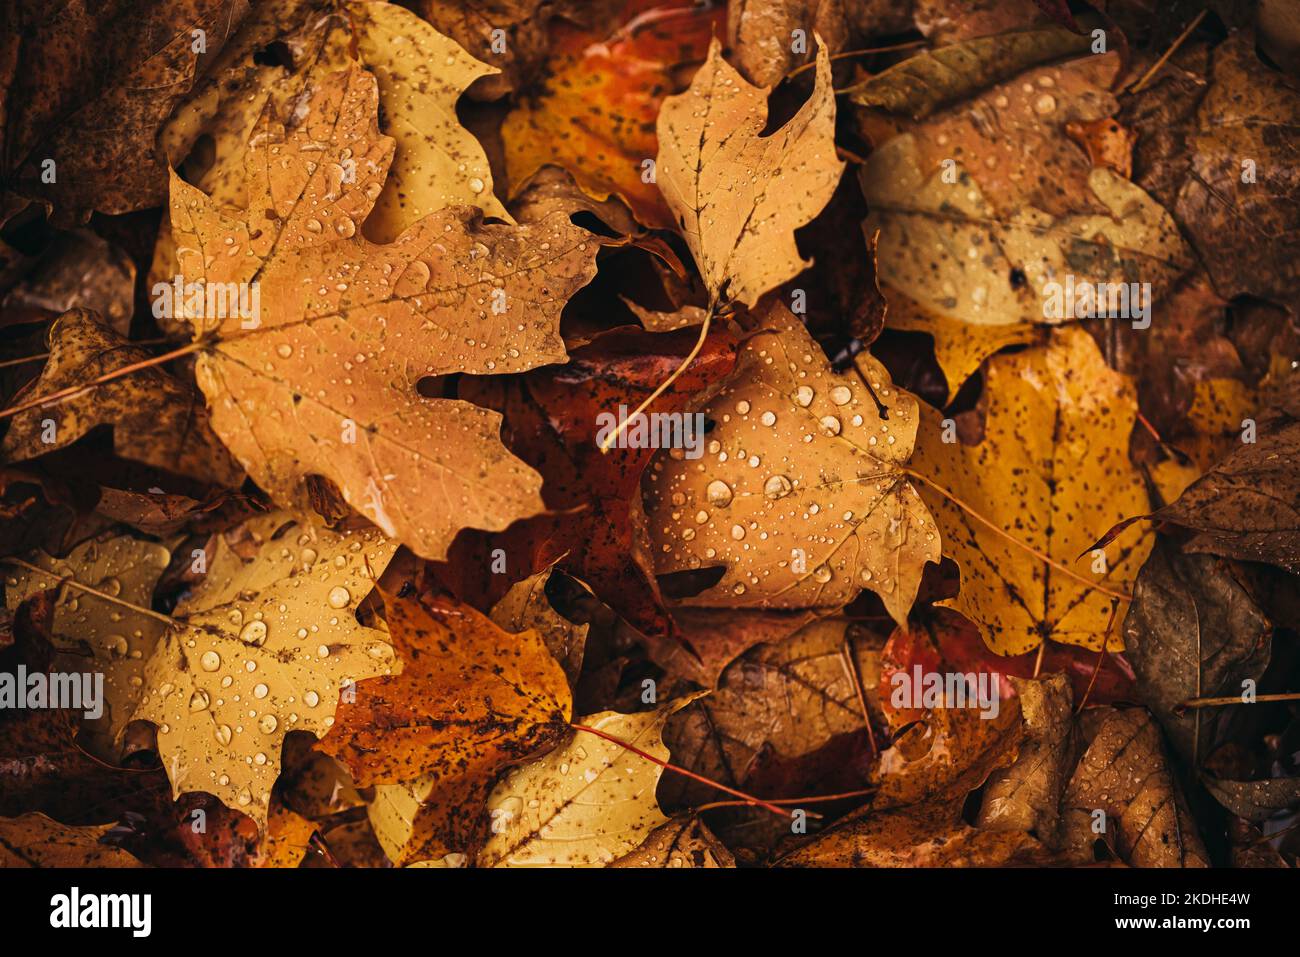 Close up of fallen leaves on ground in autumn covered in raindrops. Stock Photo